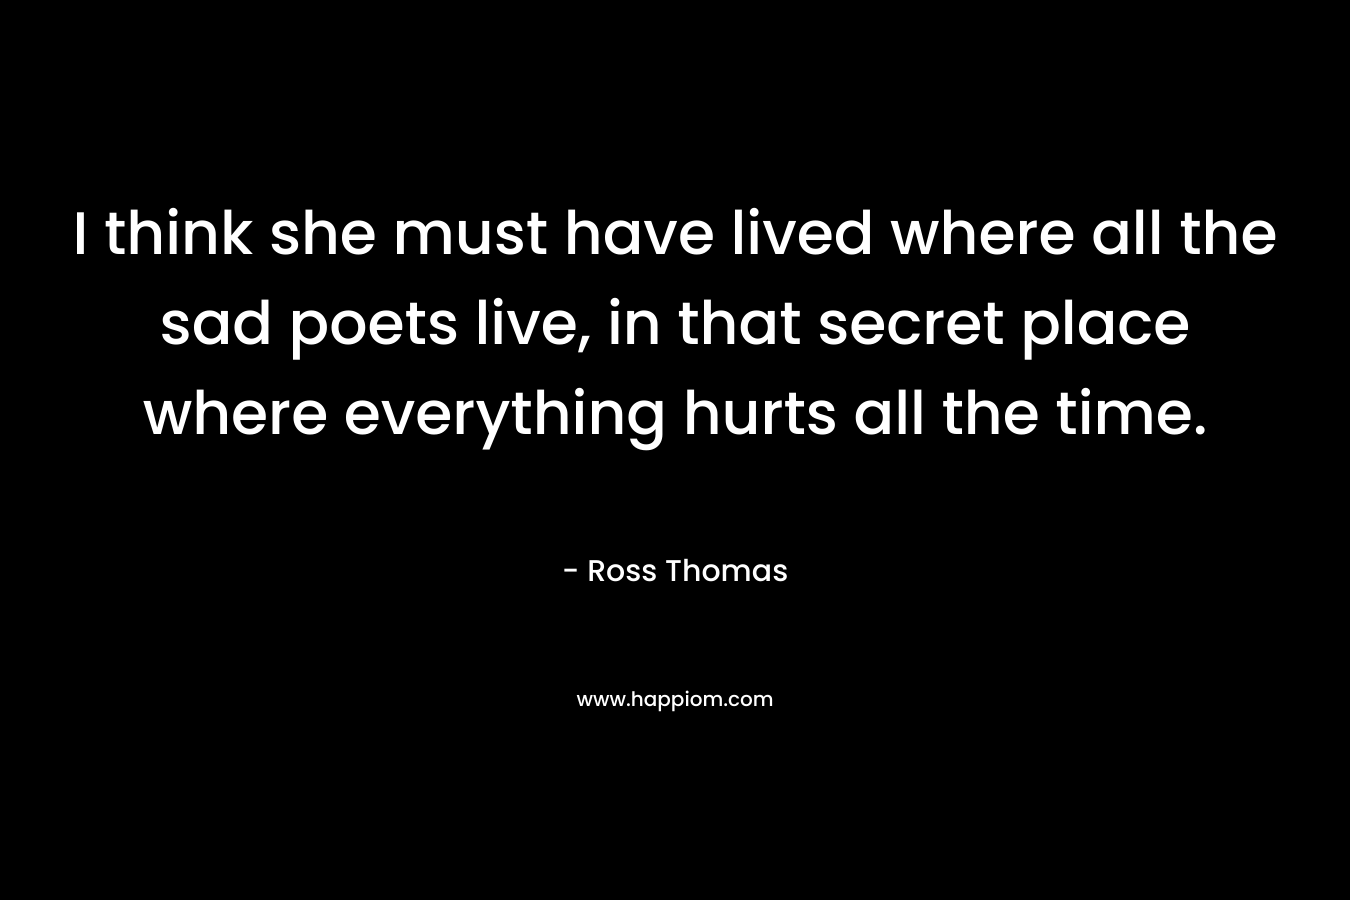 I think she must have lived where all the sad poets live, in that secret place where everything hurts all the time.